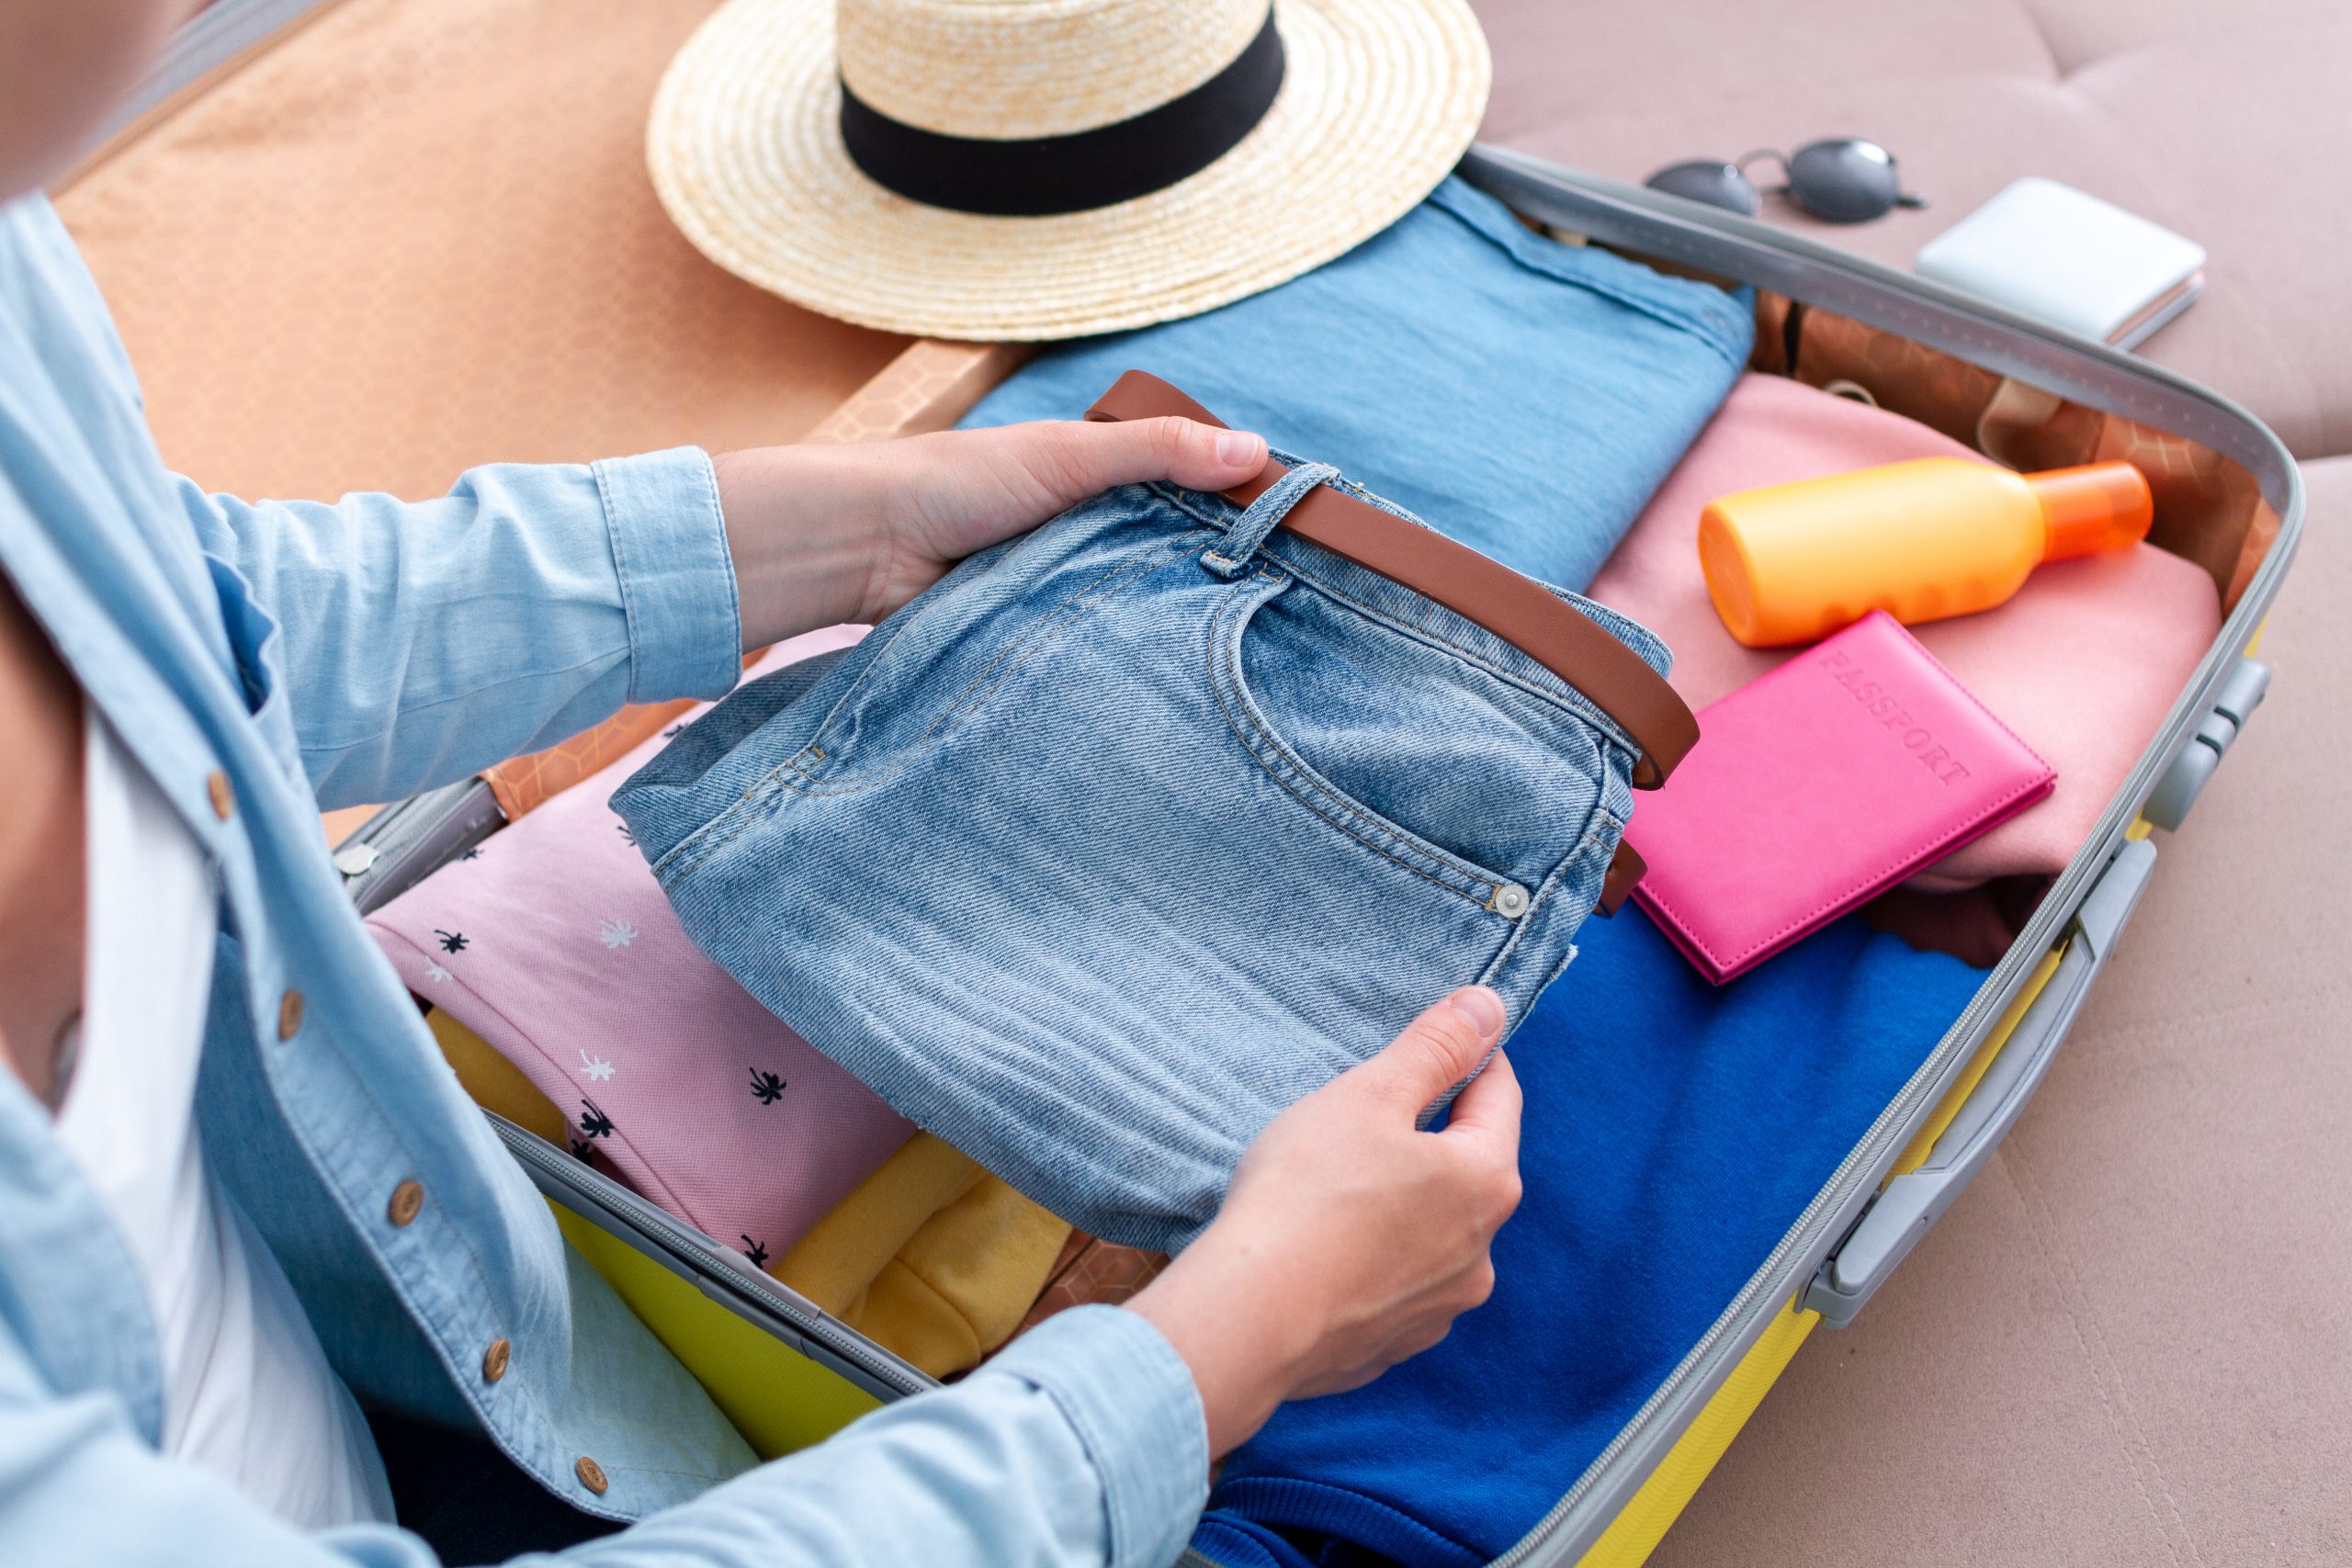 Essential Items to Pack for a Caribbean Cruise